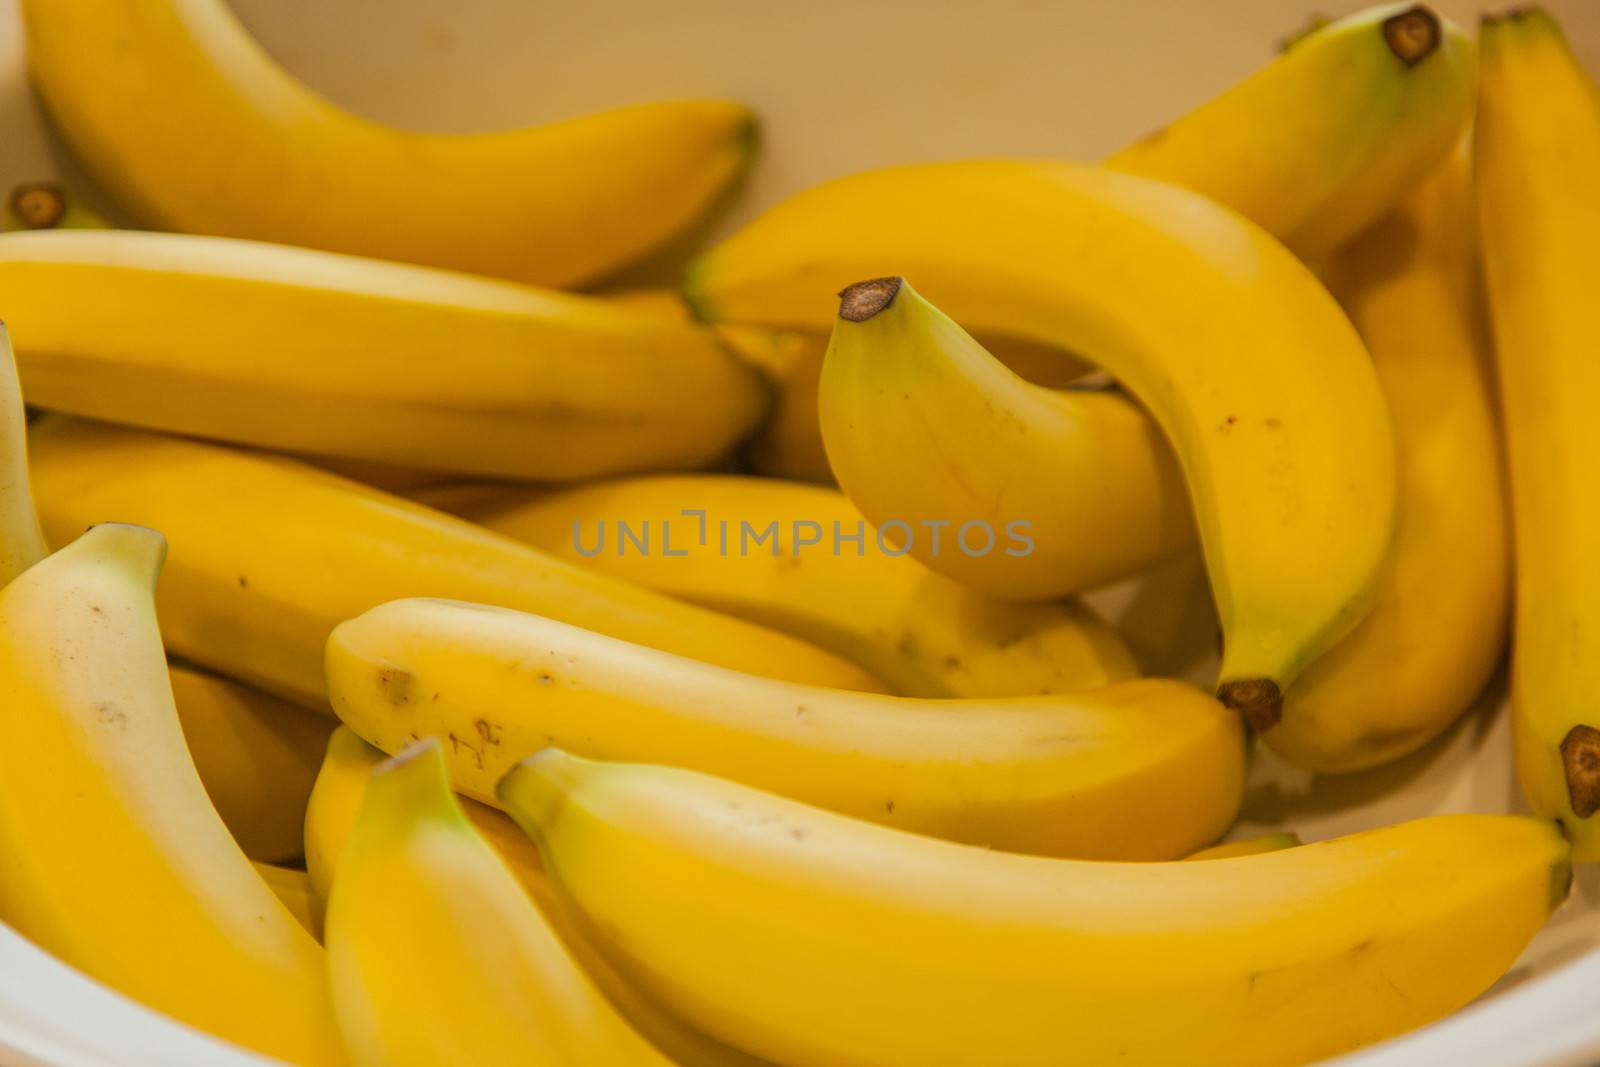 Banana is the common name for an edible fruit produced by several kinds of large herbaceous flowering plants of the genus Musa.